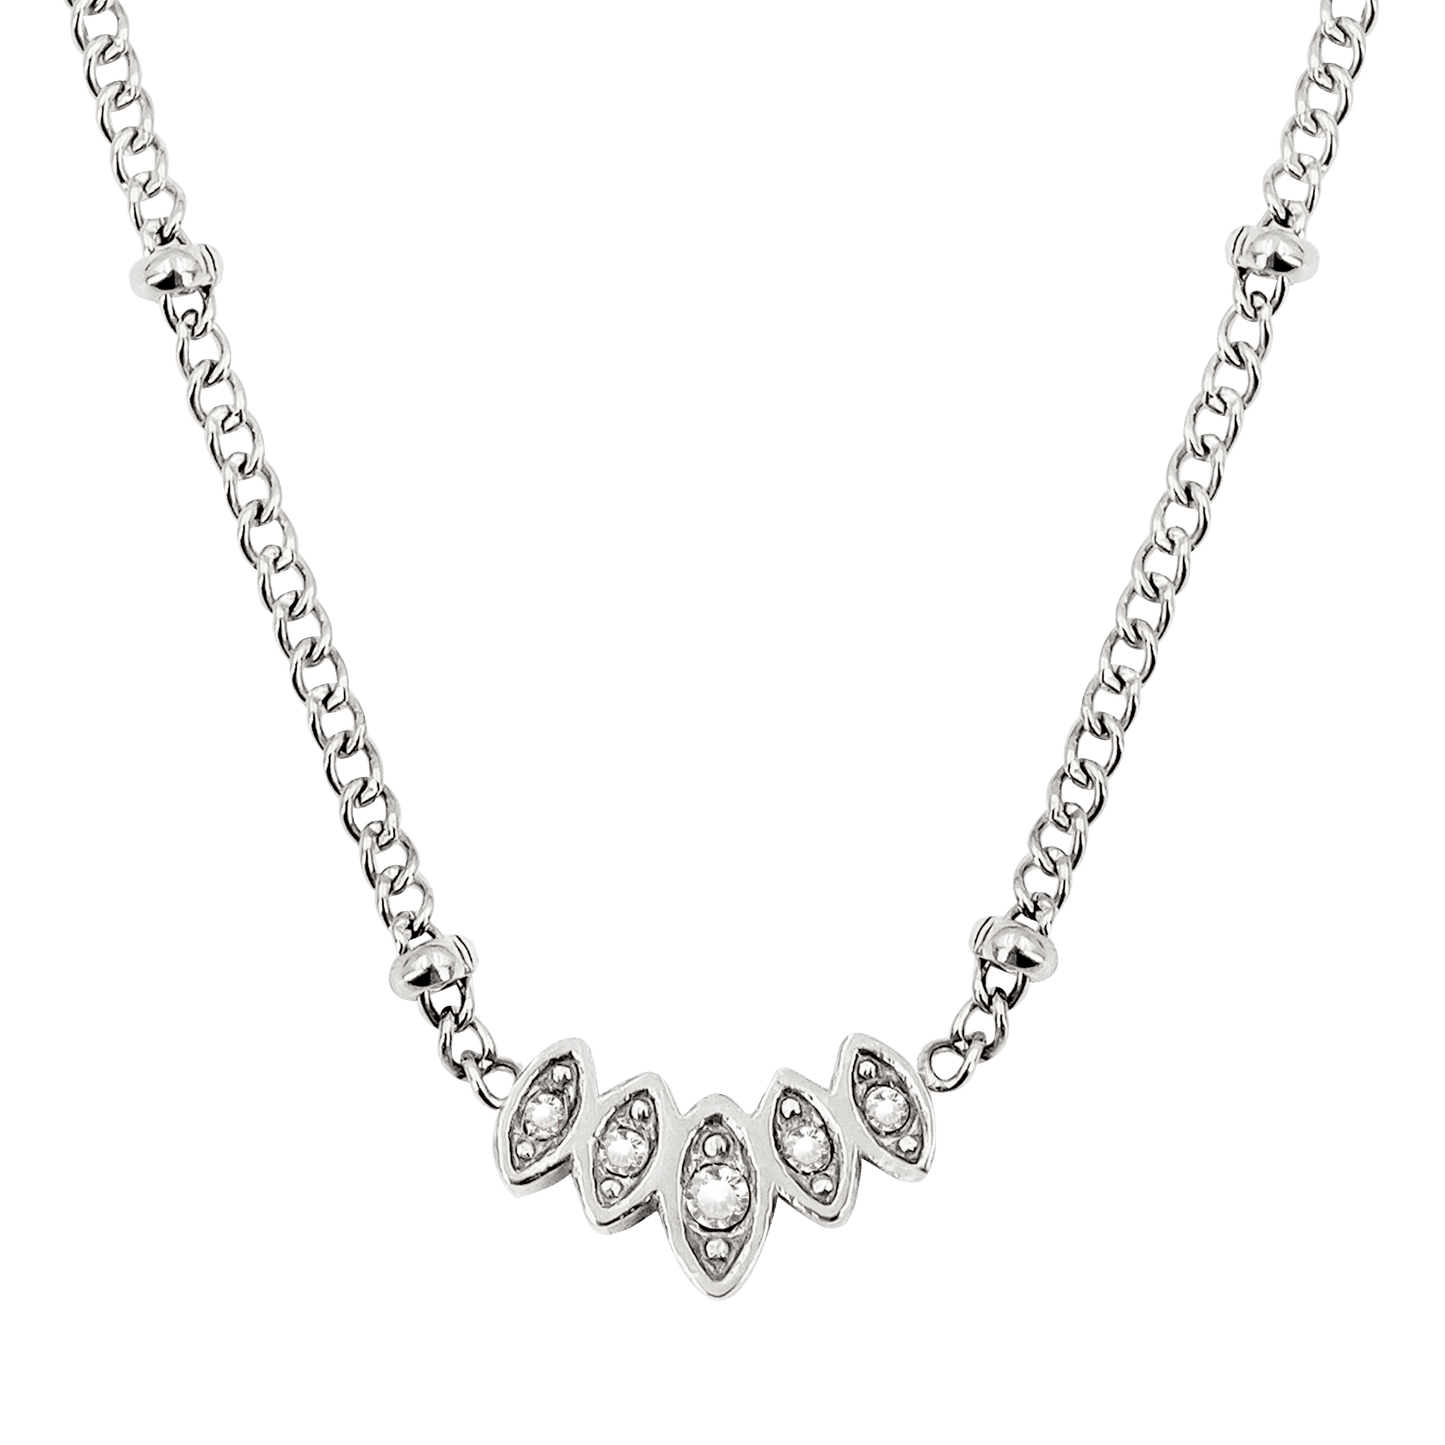 Sparkling Eyes Necklace Silver